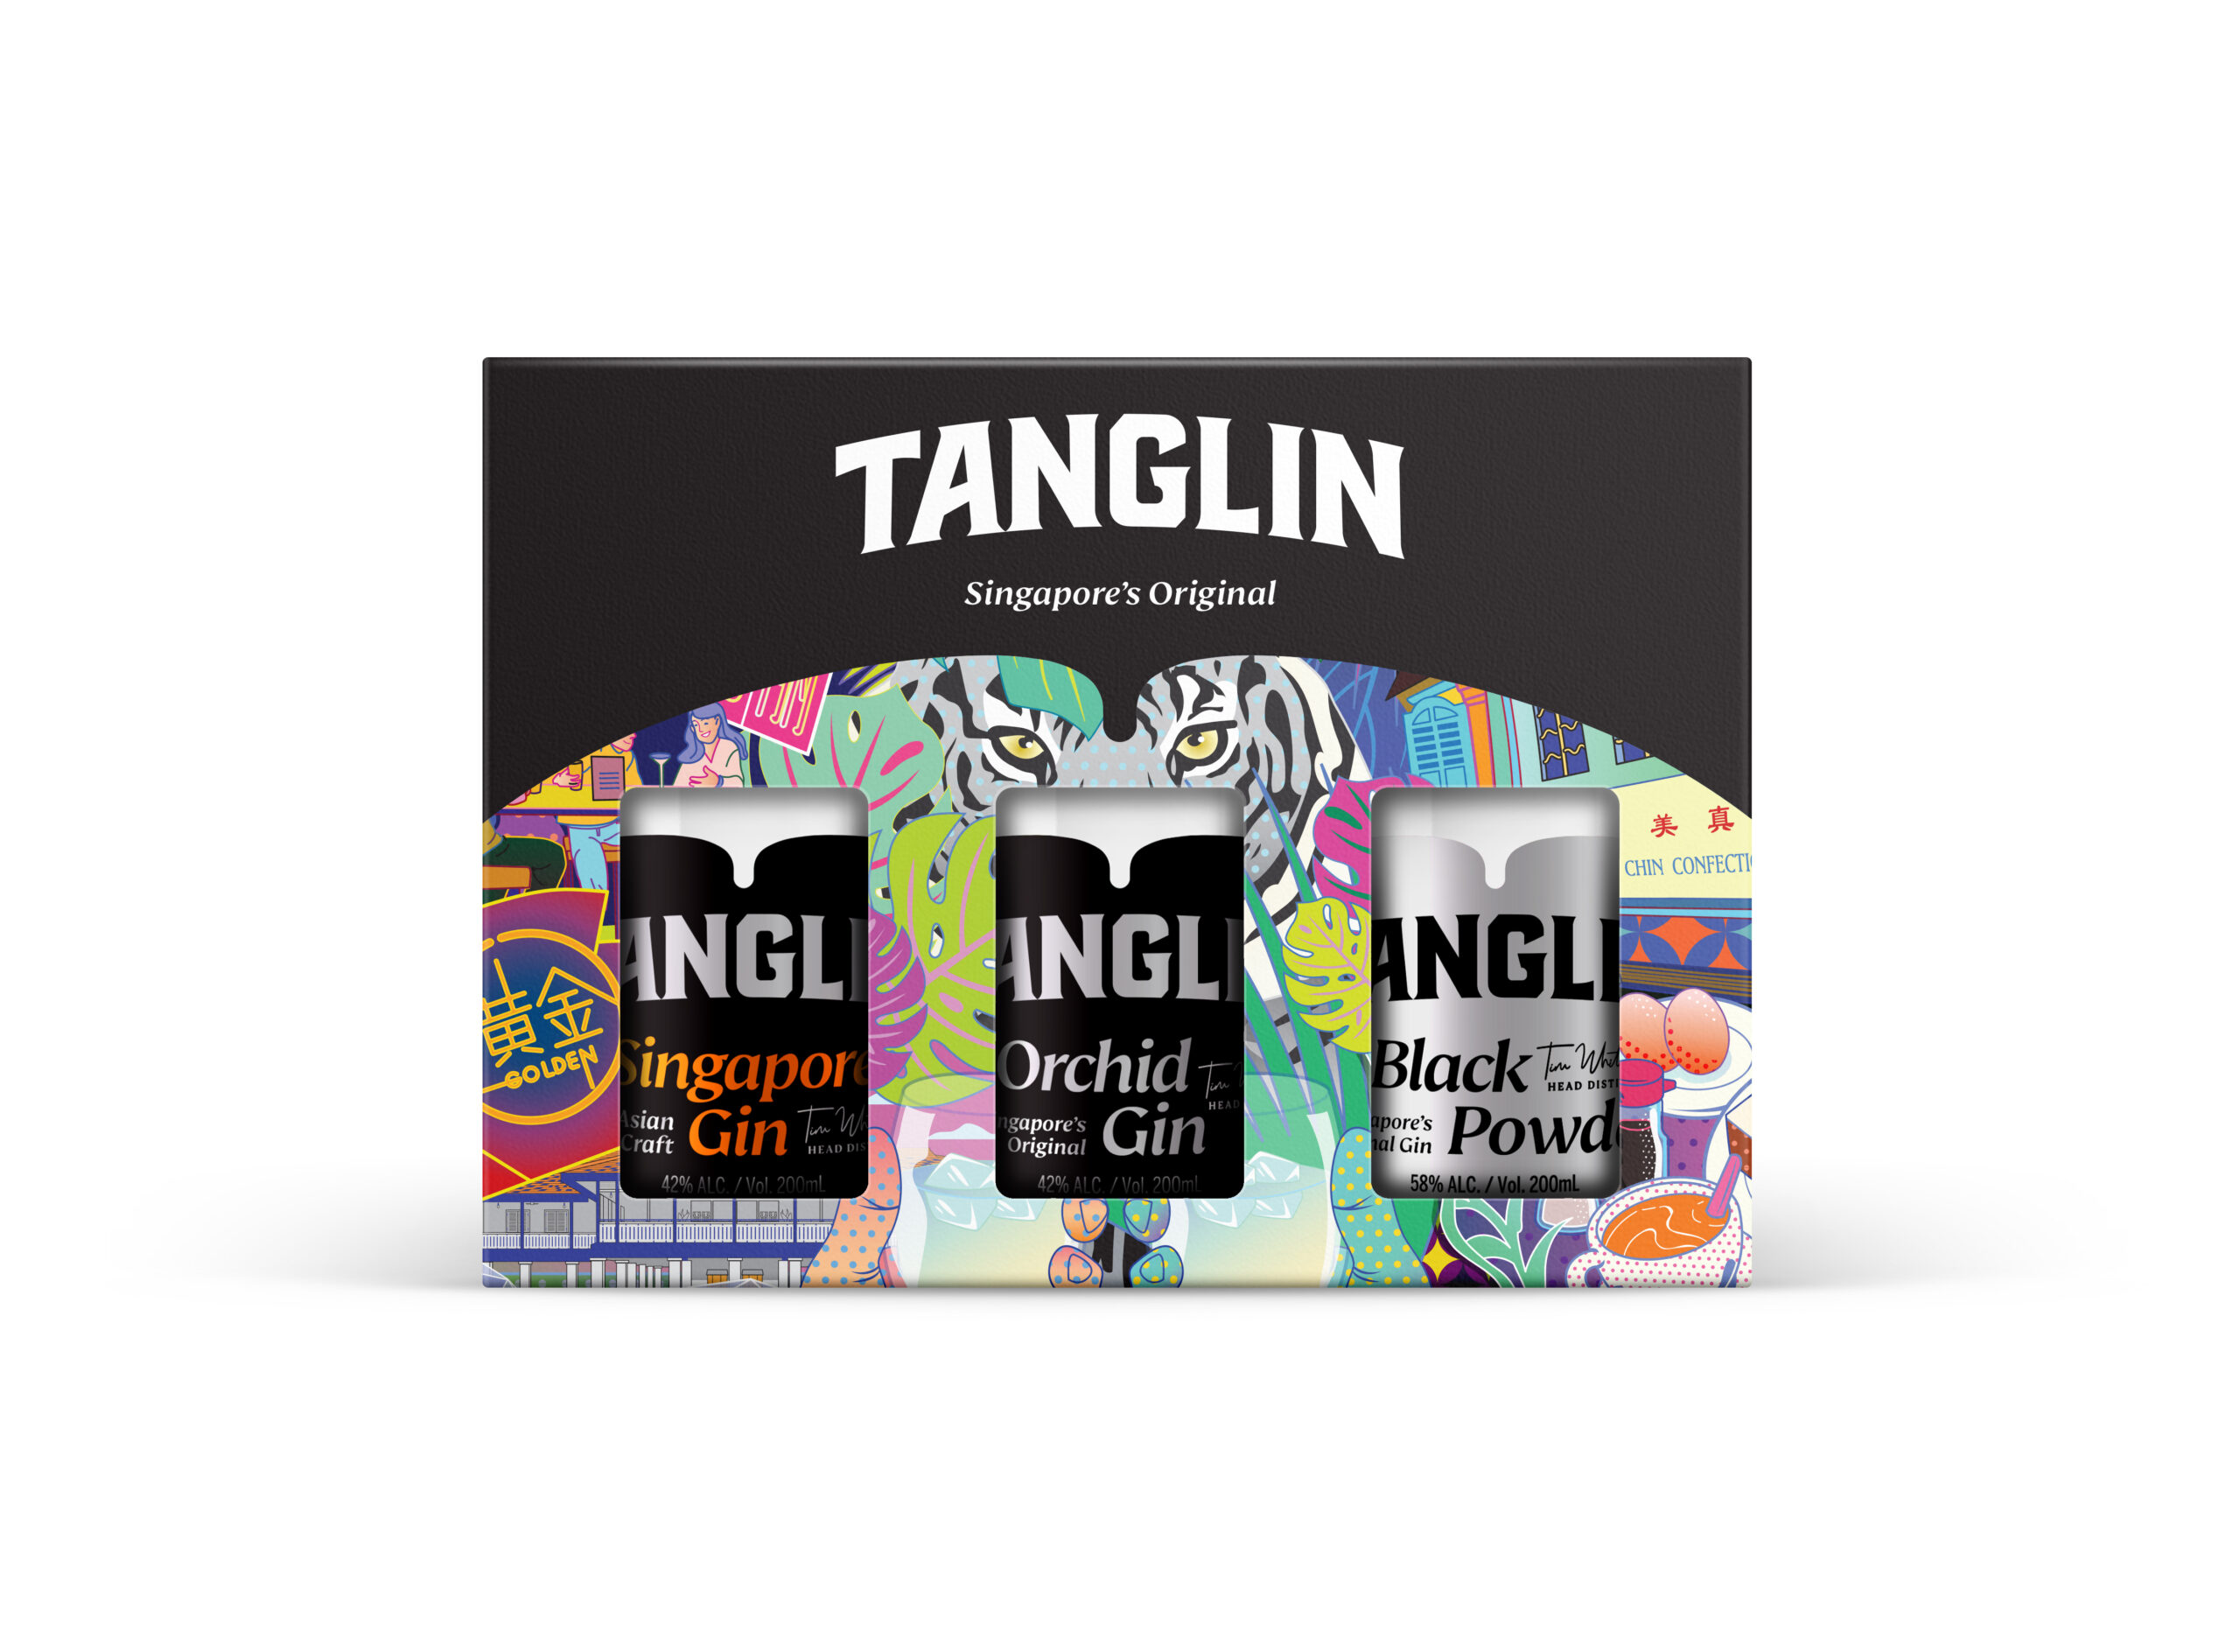 The Tanglin Gift Pack